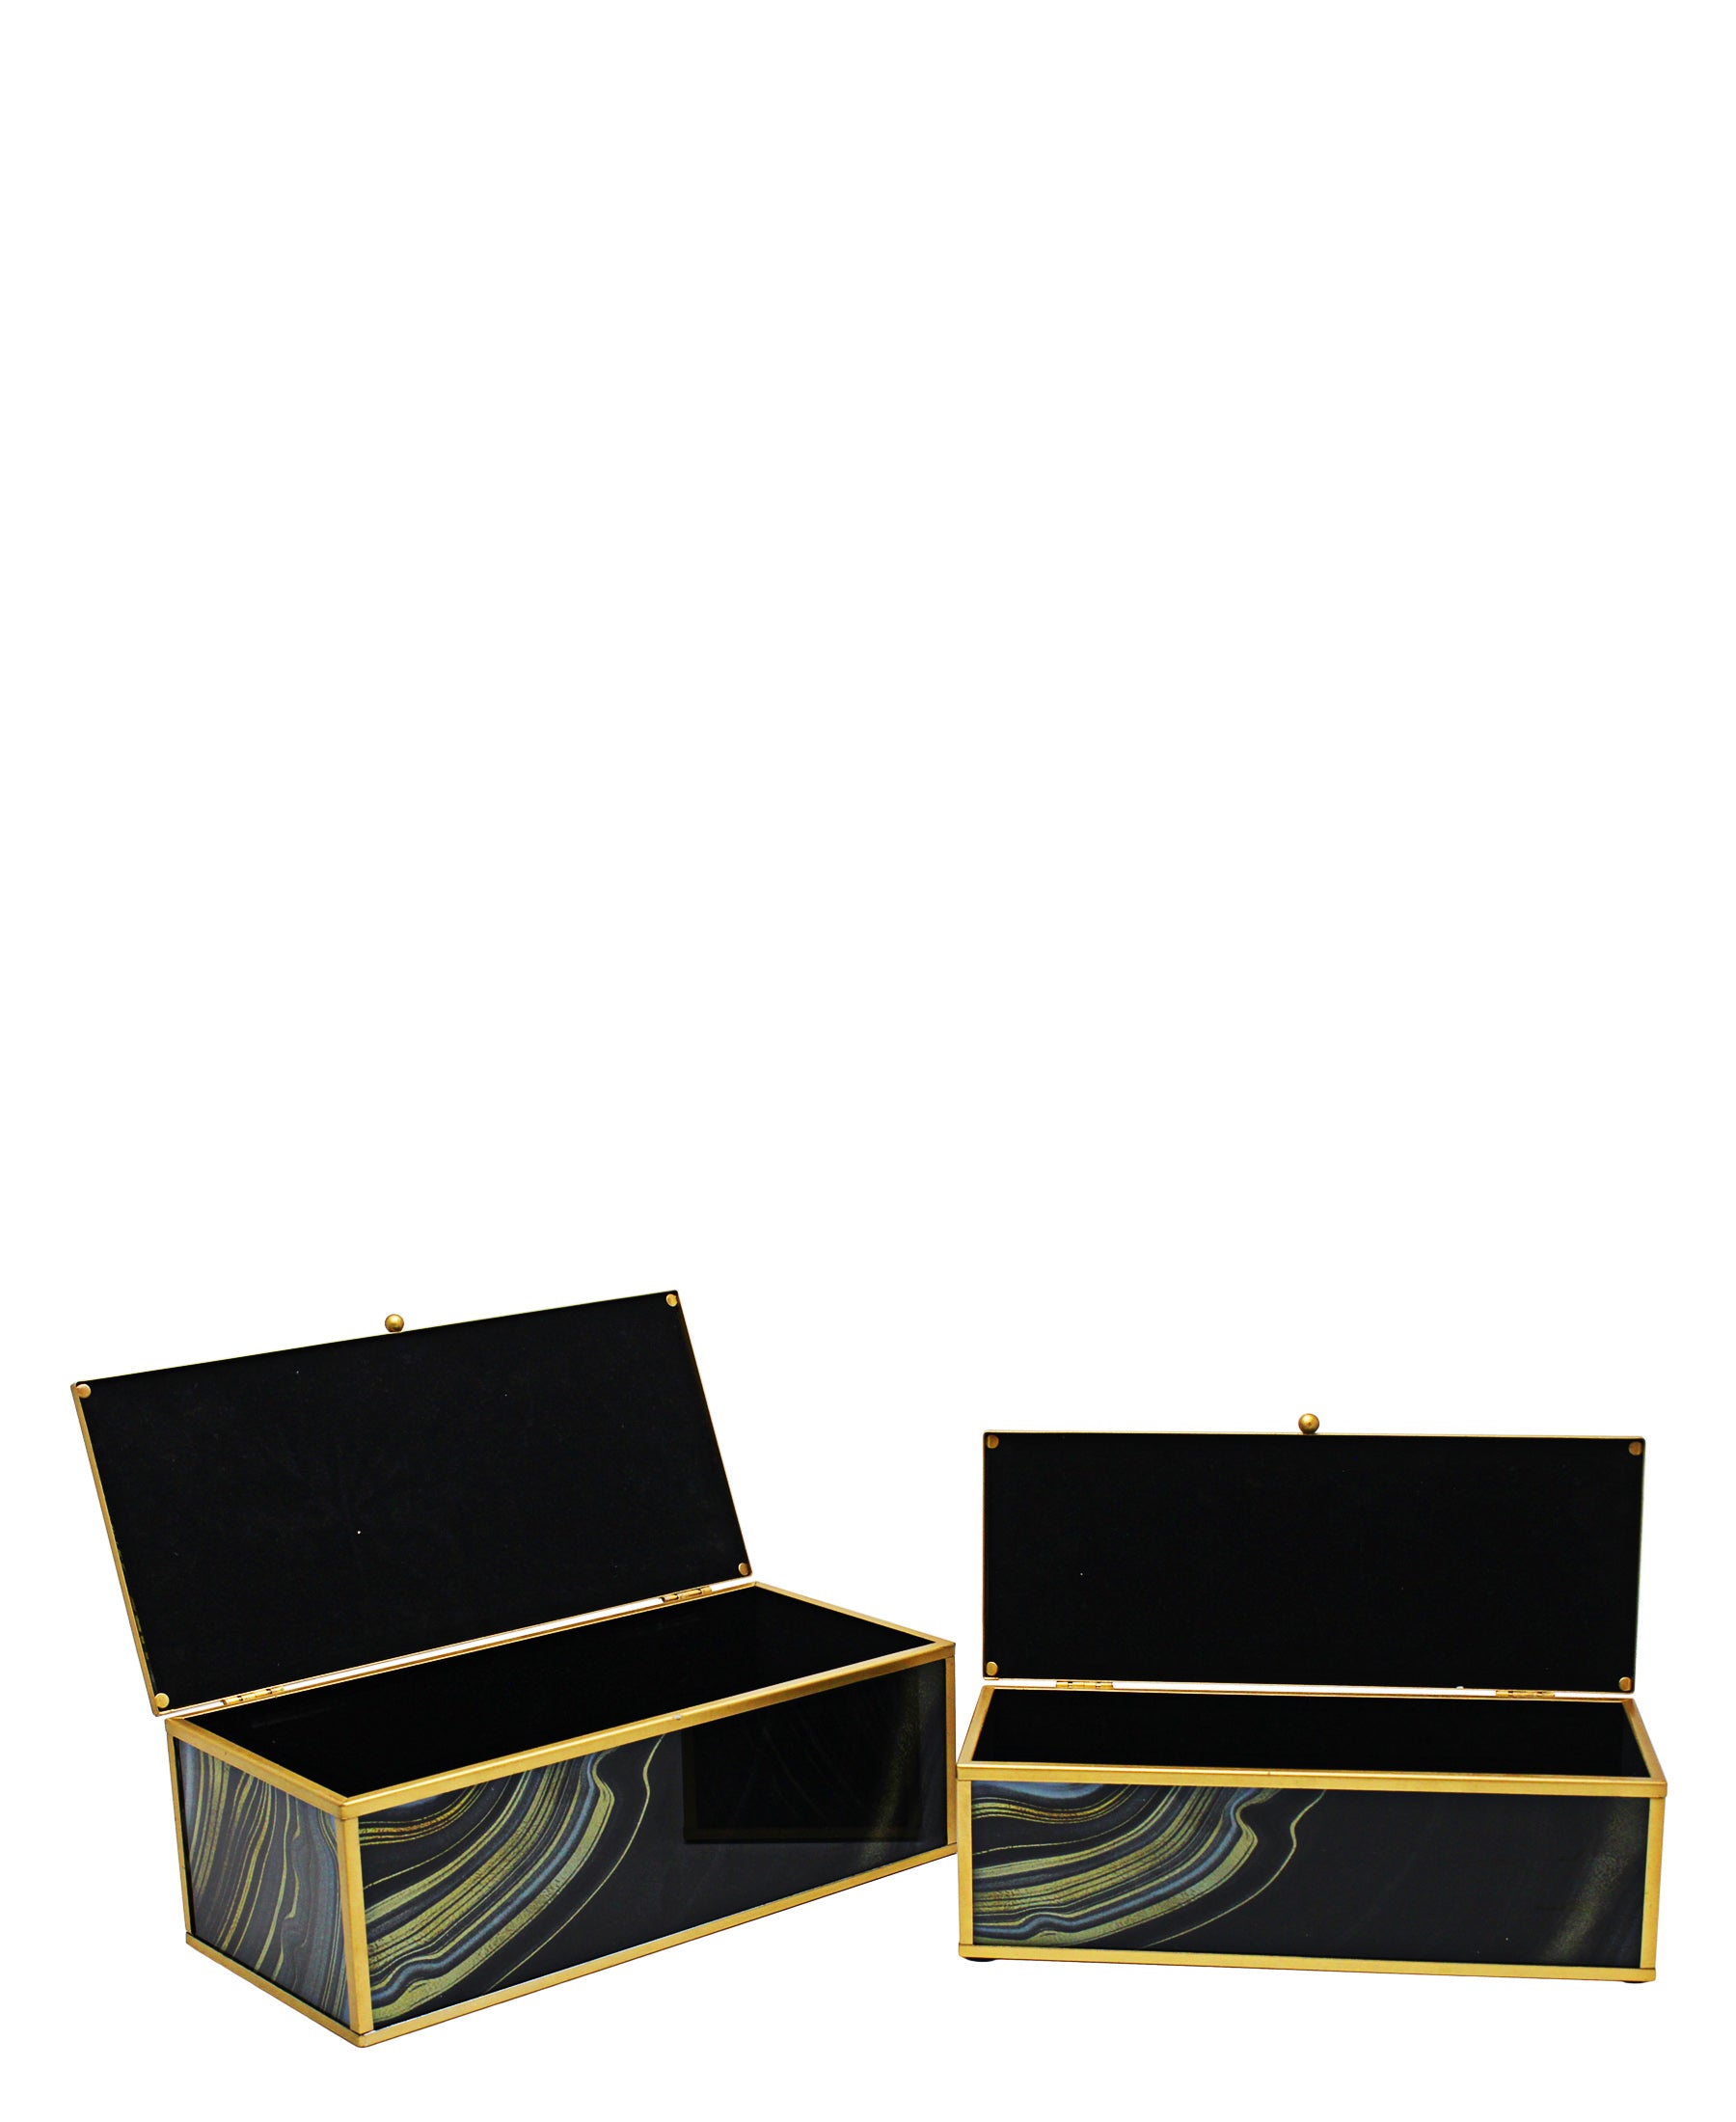 Glass Agate Wave Box With Metal Frame 2 Piece - Blue, Black & Gold